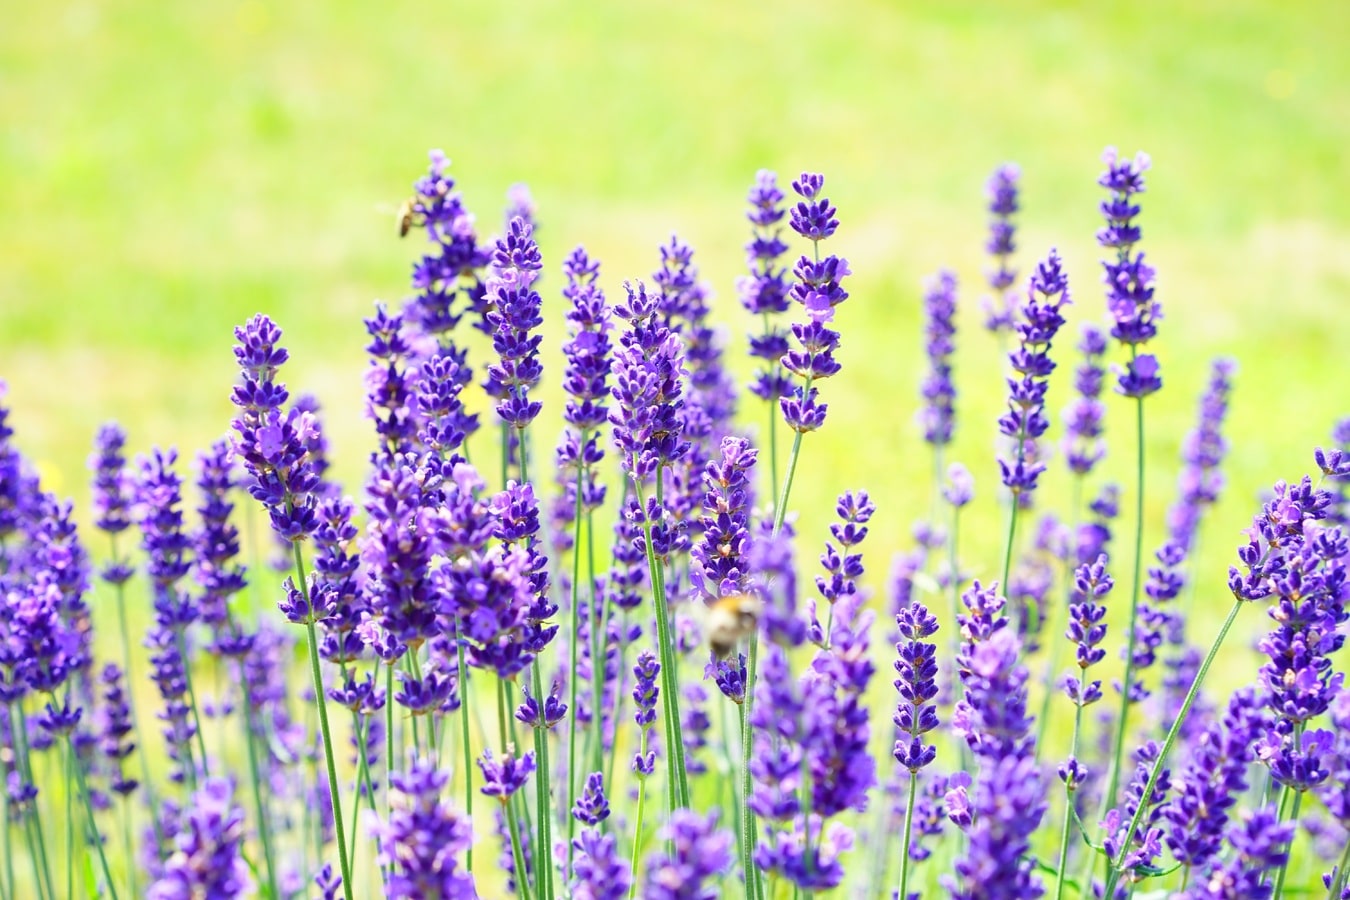 How to replant lavender?